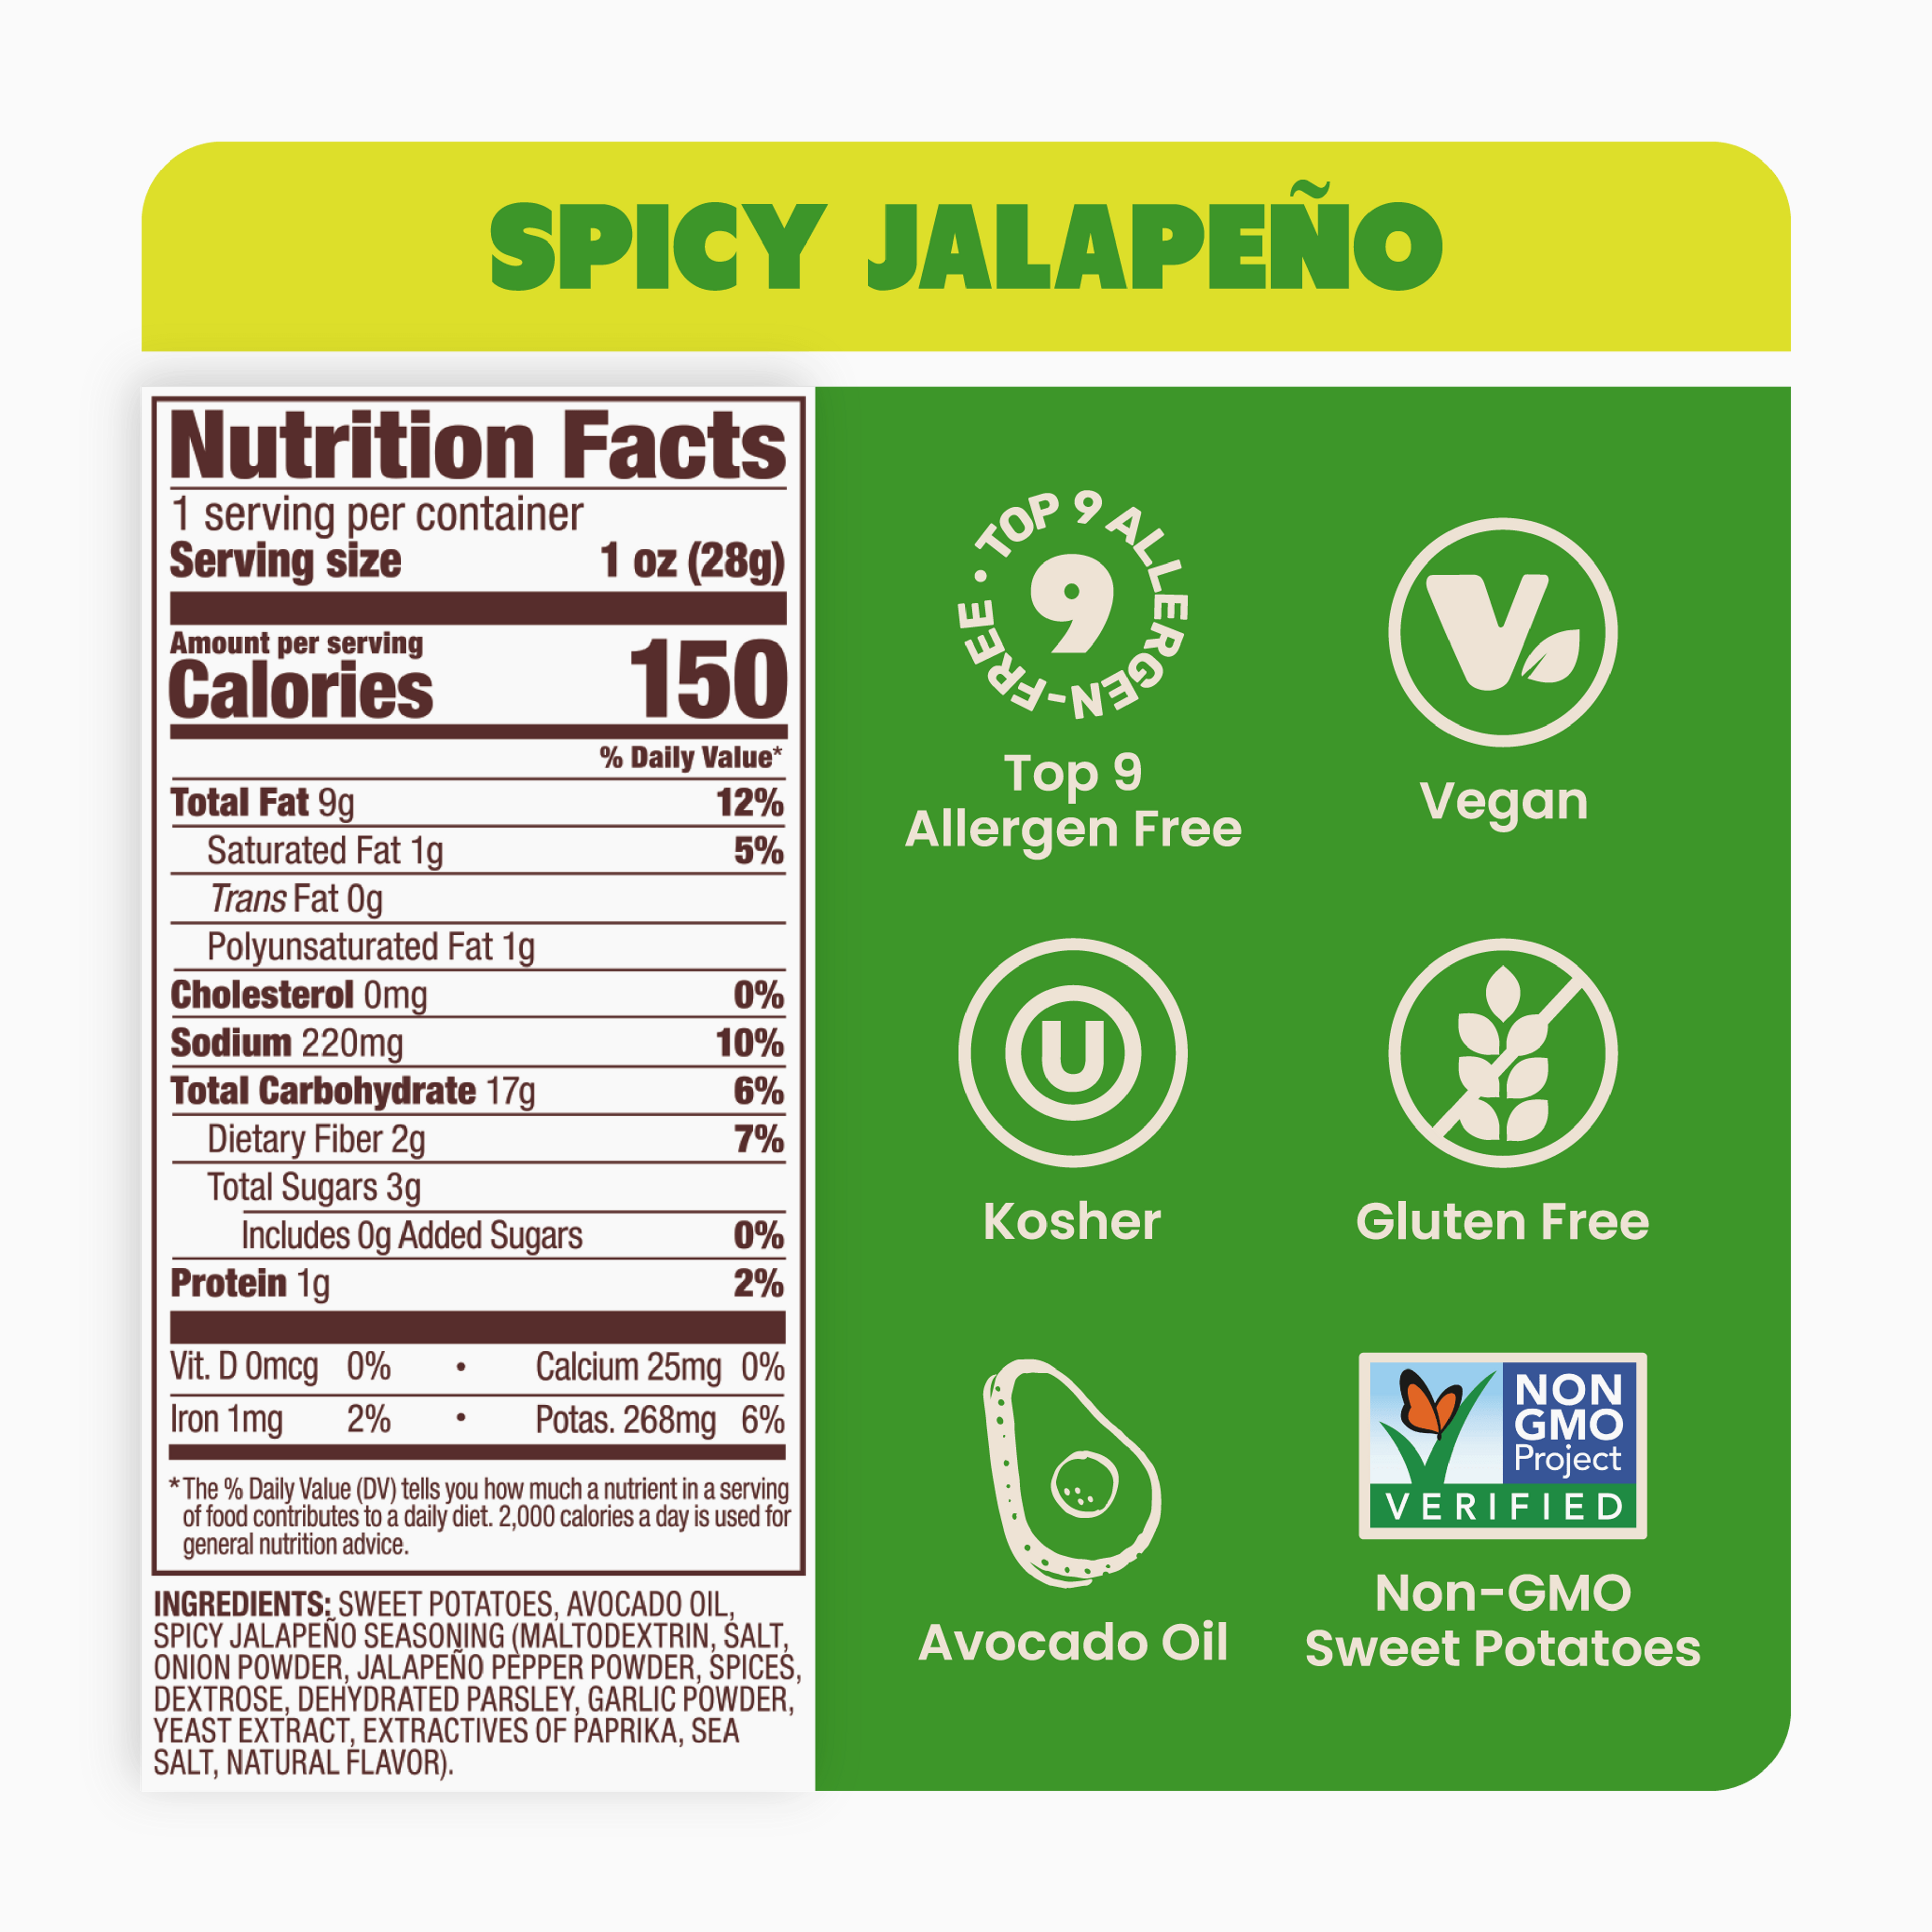 Spicy Jalapeño Sweet Potato Chips in Avocado Oil 1oz (Pack of 30)